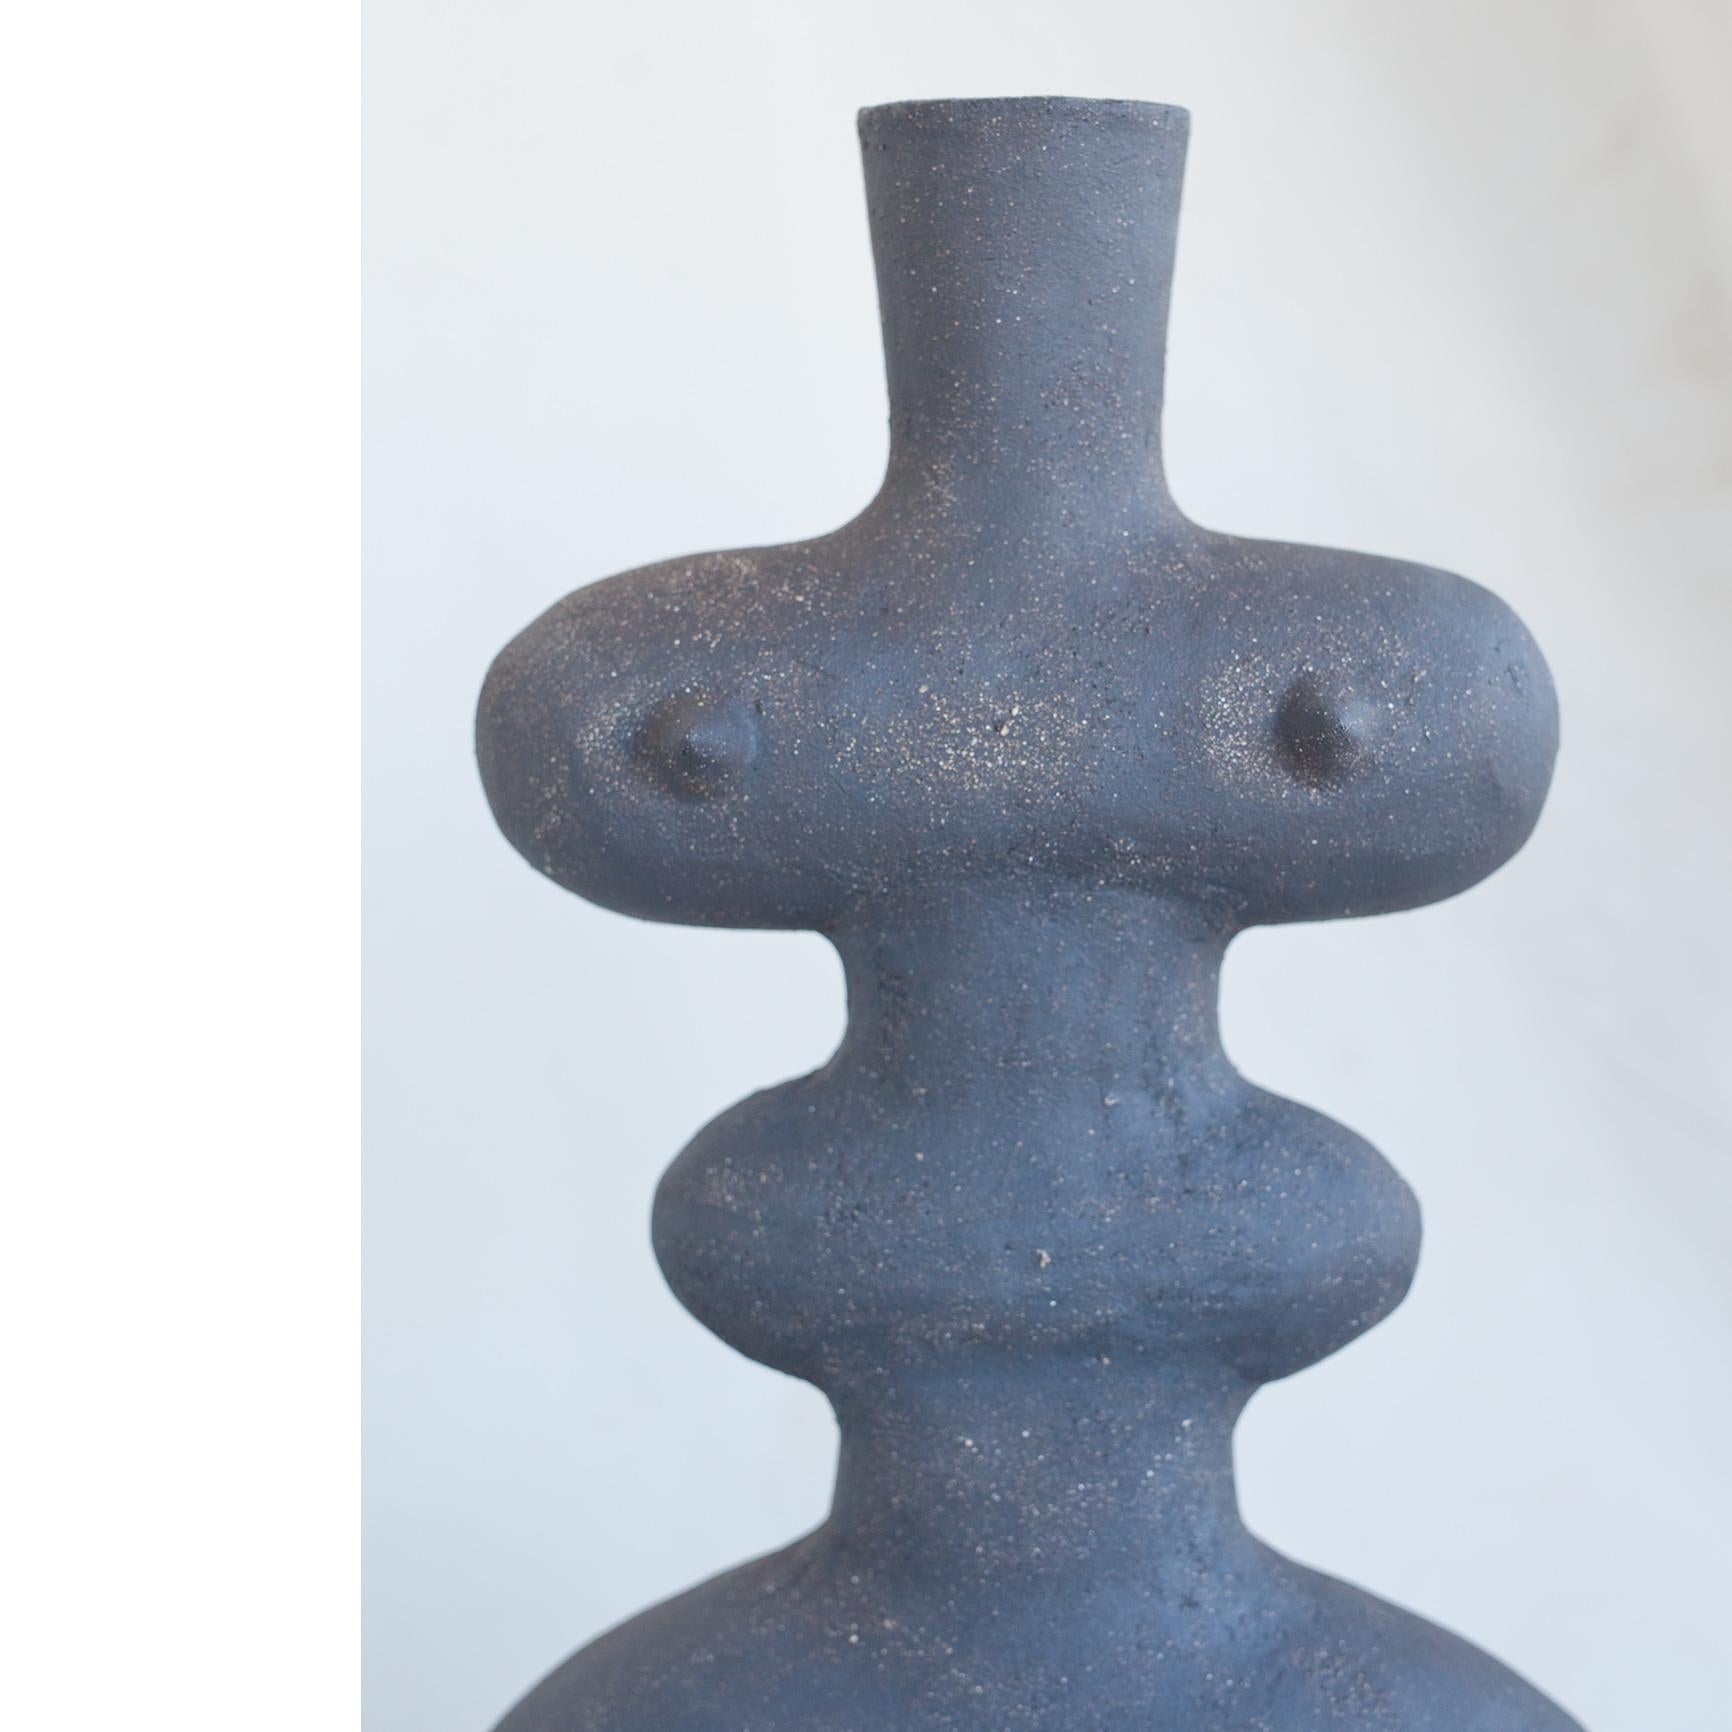 British Contemporary and Handcrafted, Haniwa Warrior 81 Decorative Piece by Noe Kuremoto For Sale